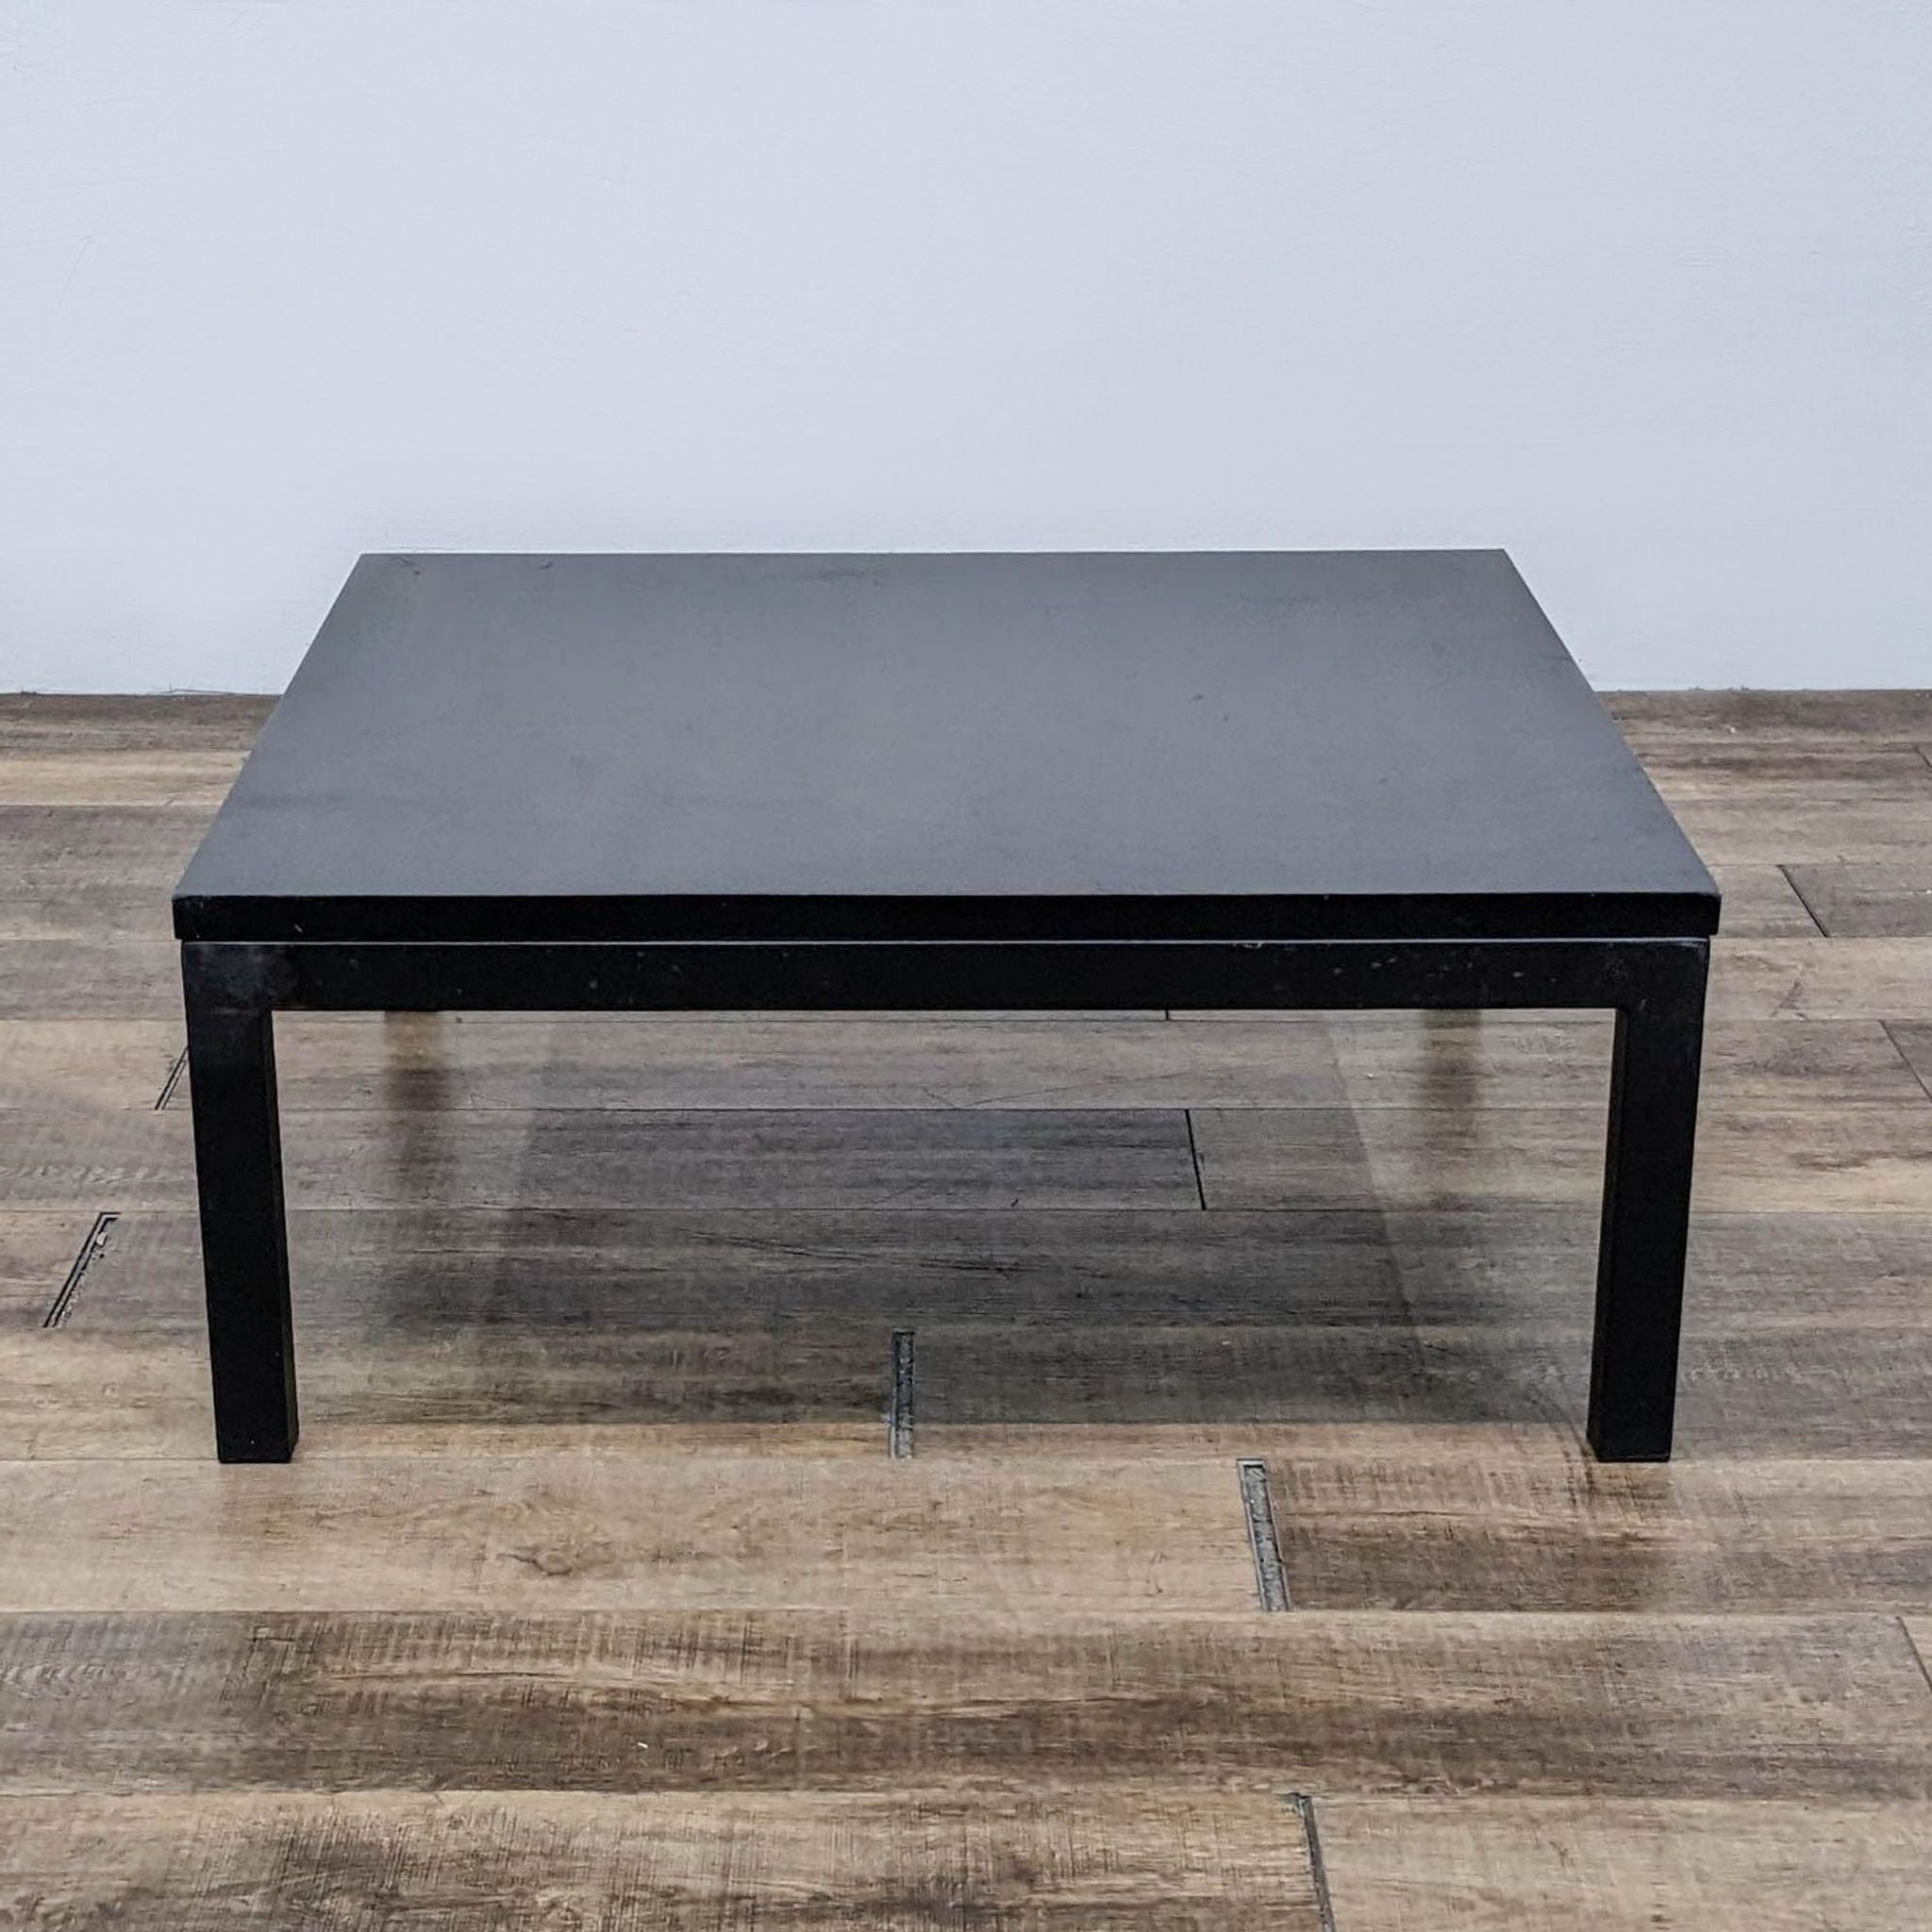 Room & Board brand Parsons style black coffee table on a wooden floor.